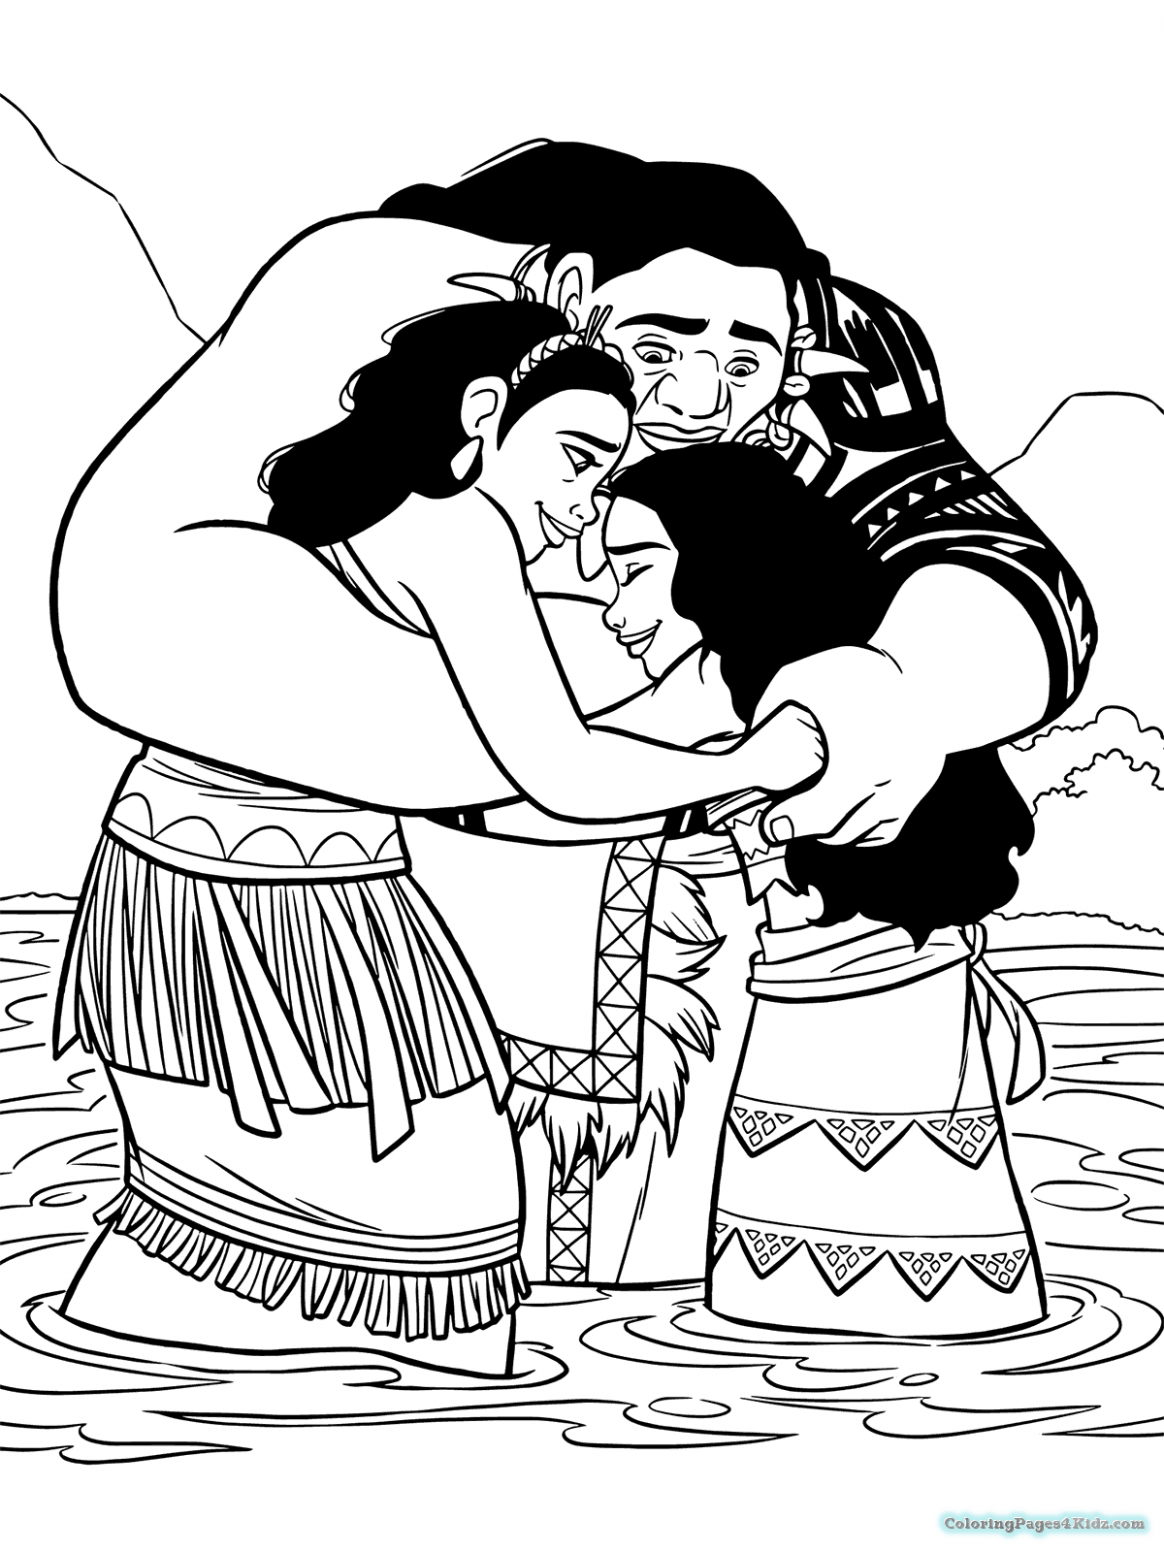 Cool Moana Family Coloring Page